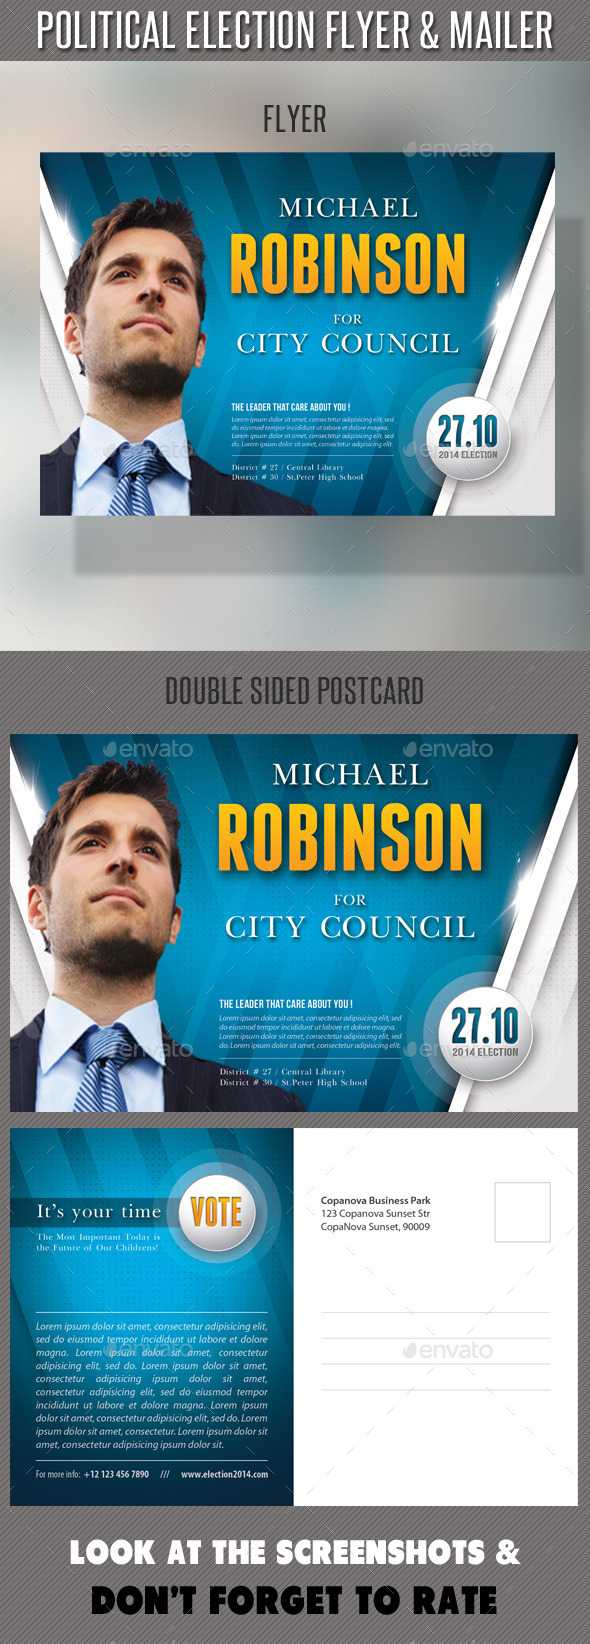 Election Poster Template Graphics, Designs & Templates Pertaining To Election Flyers Templates Free